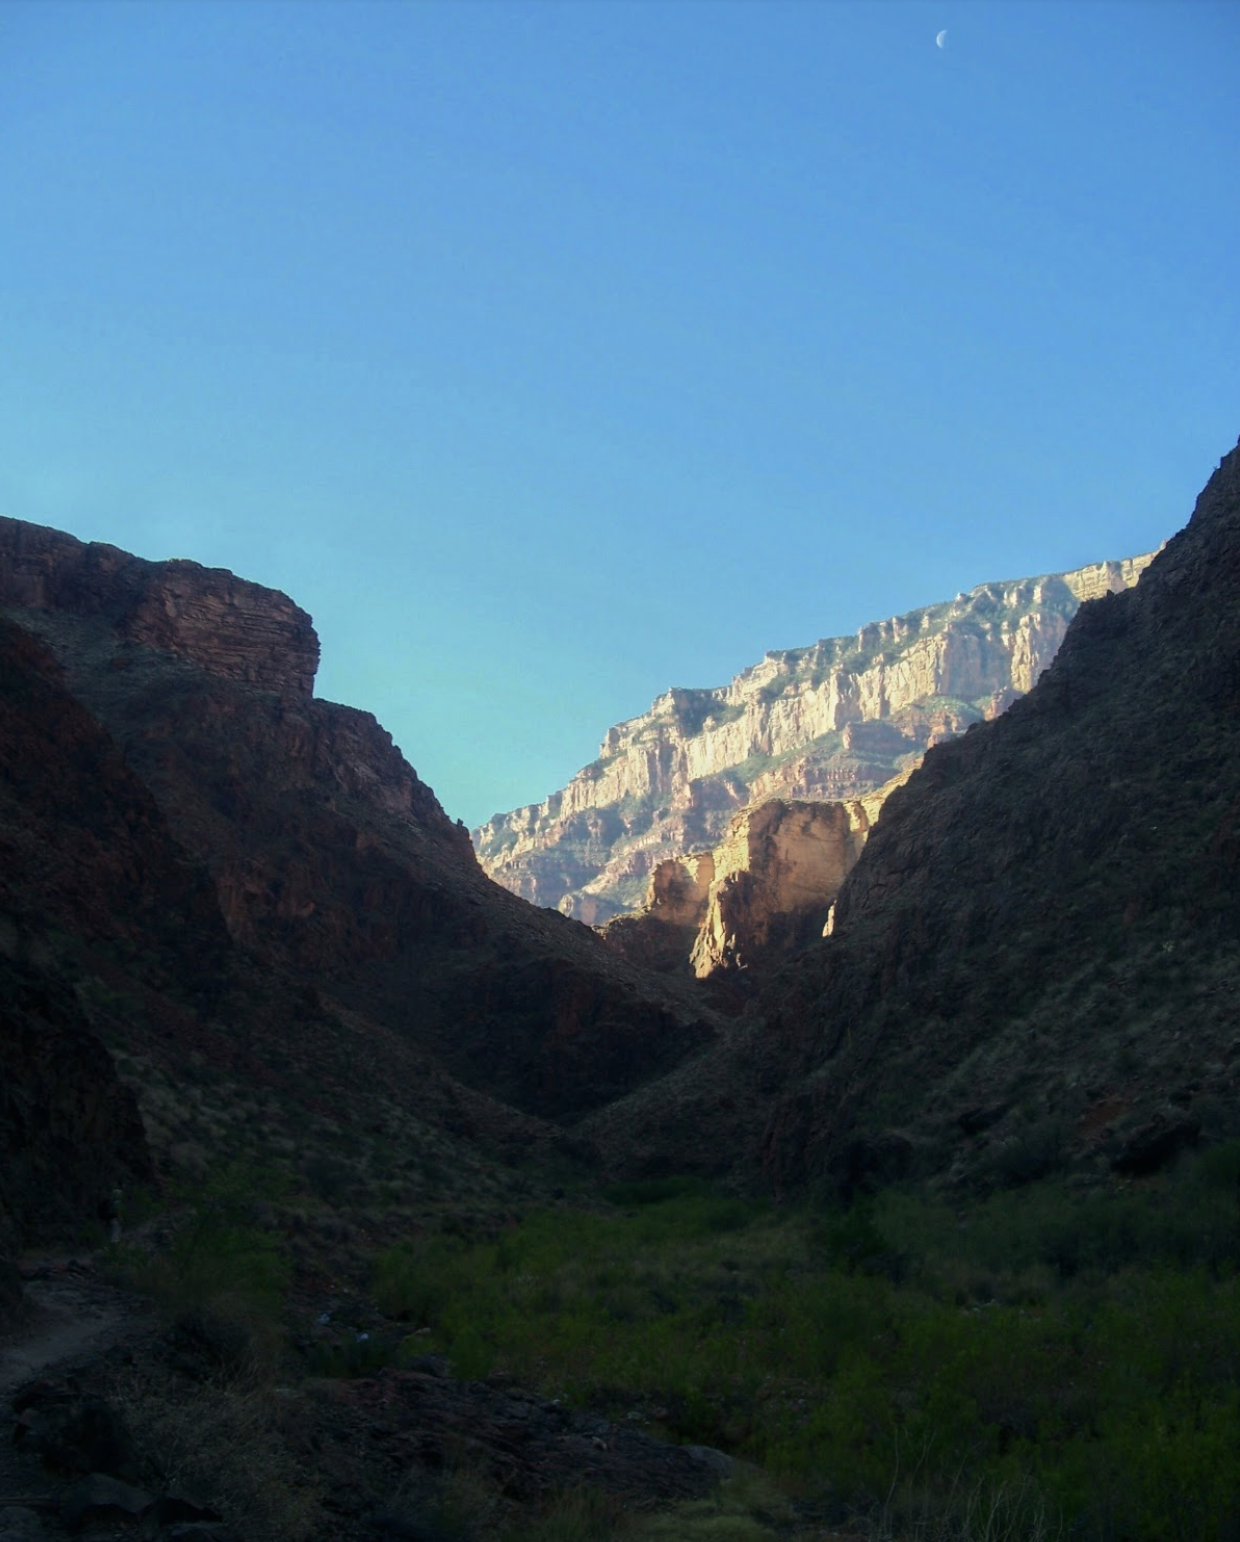 Leaving Phantom Ranch at the bottom of the canyon as the sun rises in hopes that we can make significant progress up Bright Angel Trail before the heat of the day. Photo by Karen Boudreaux, 5/10/07